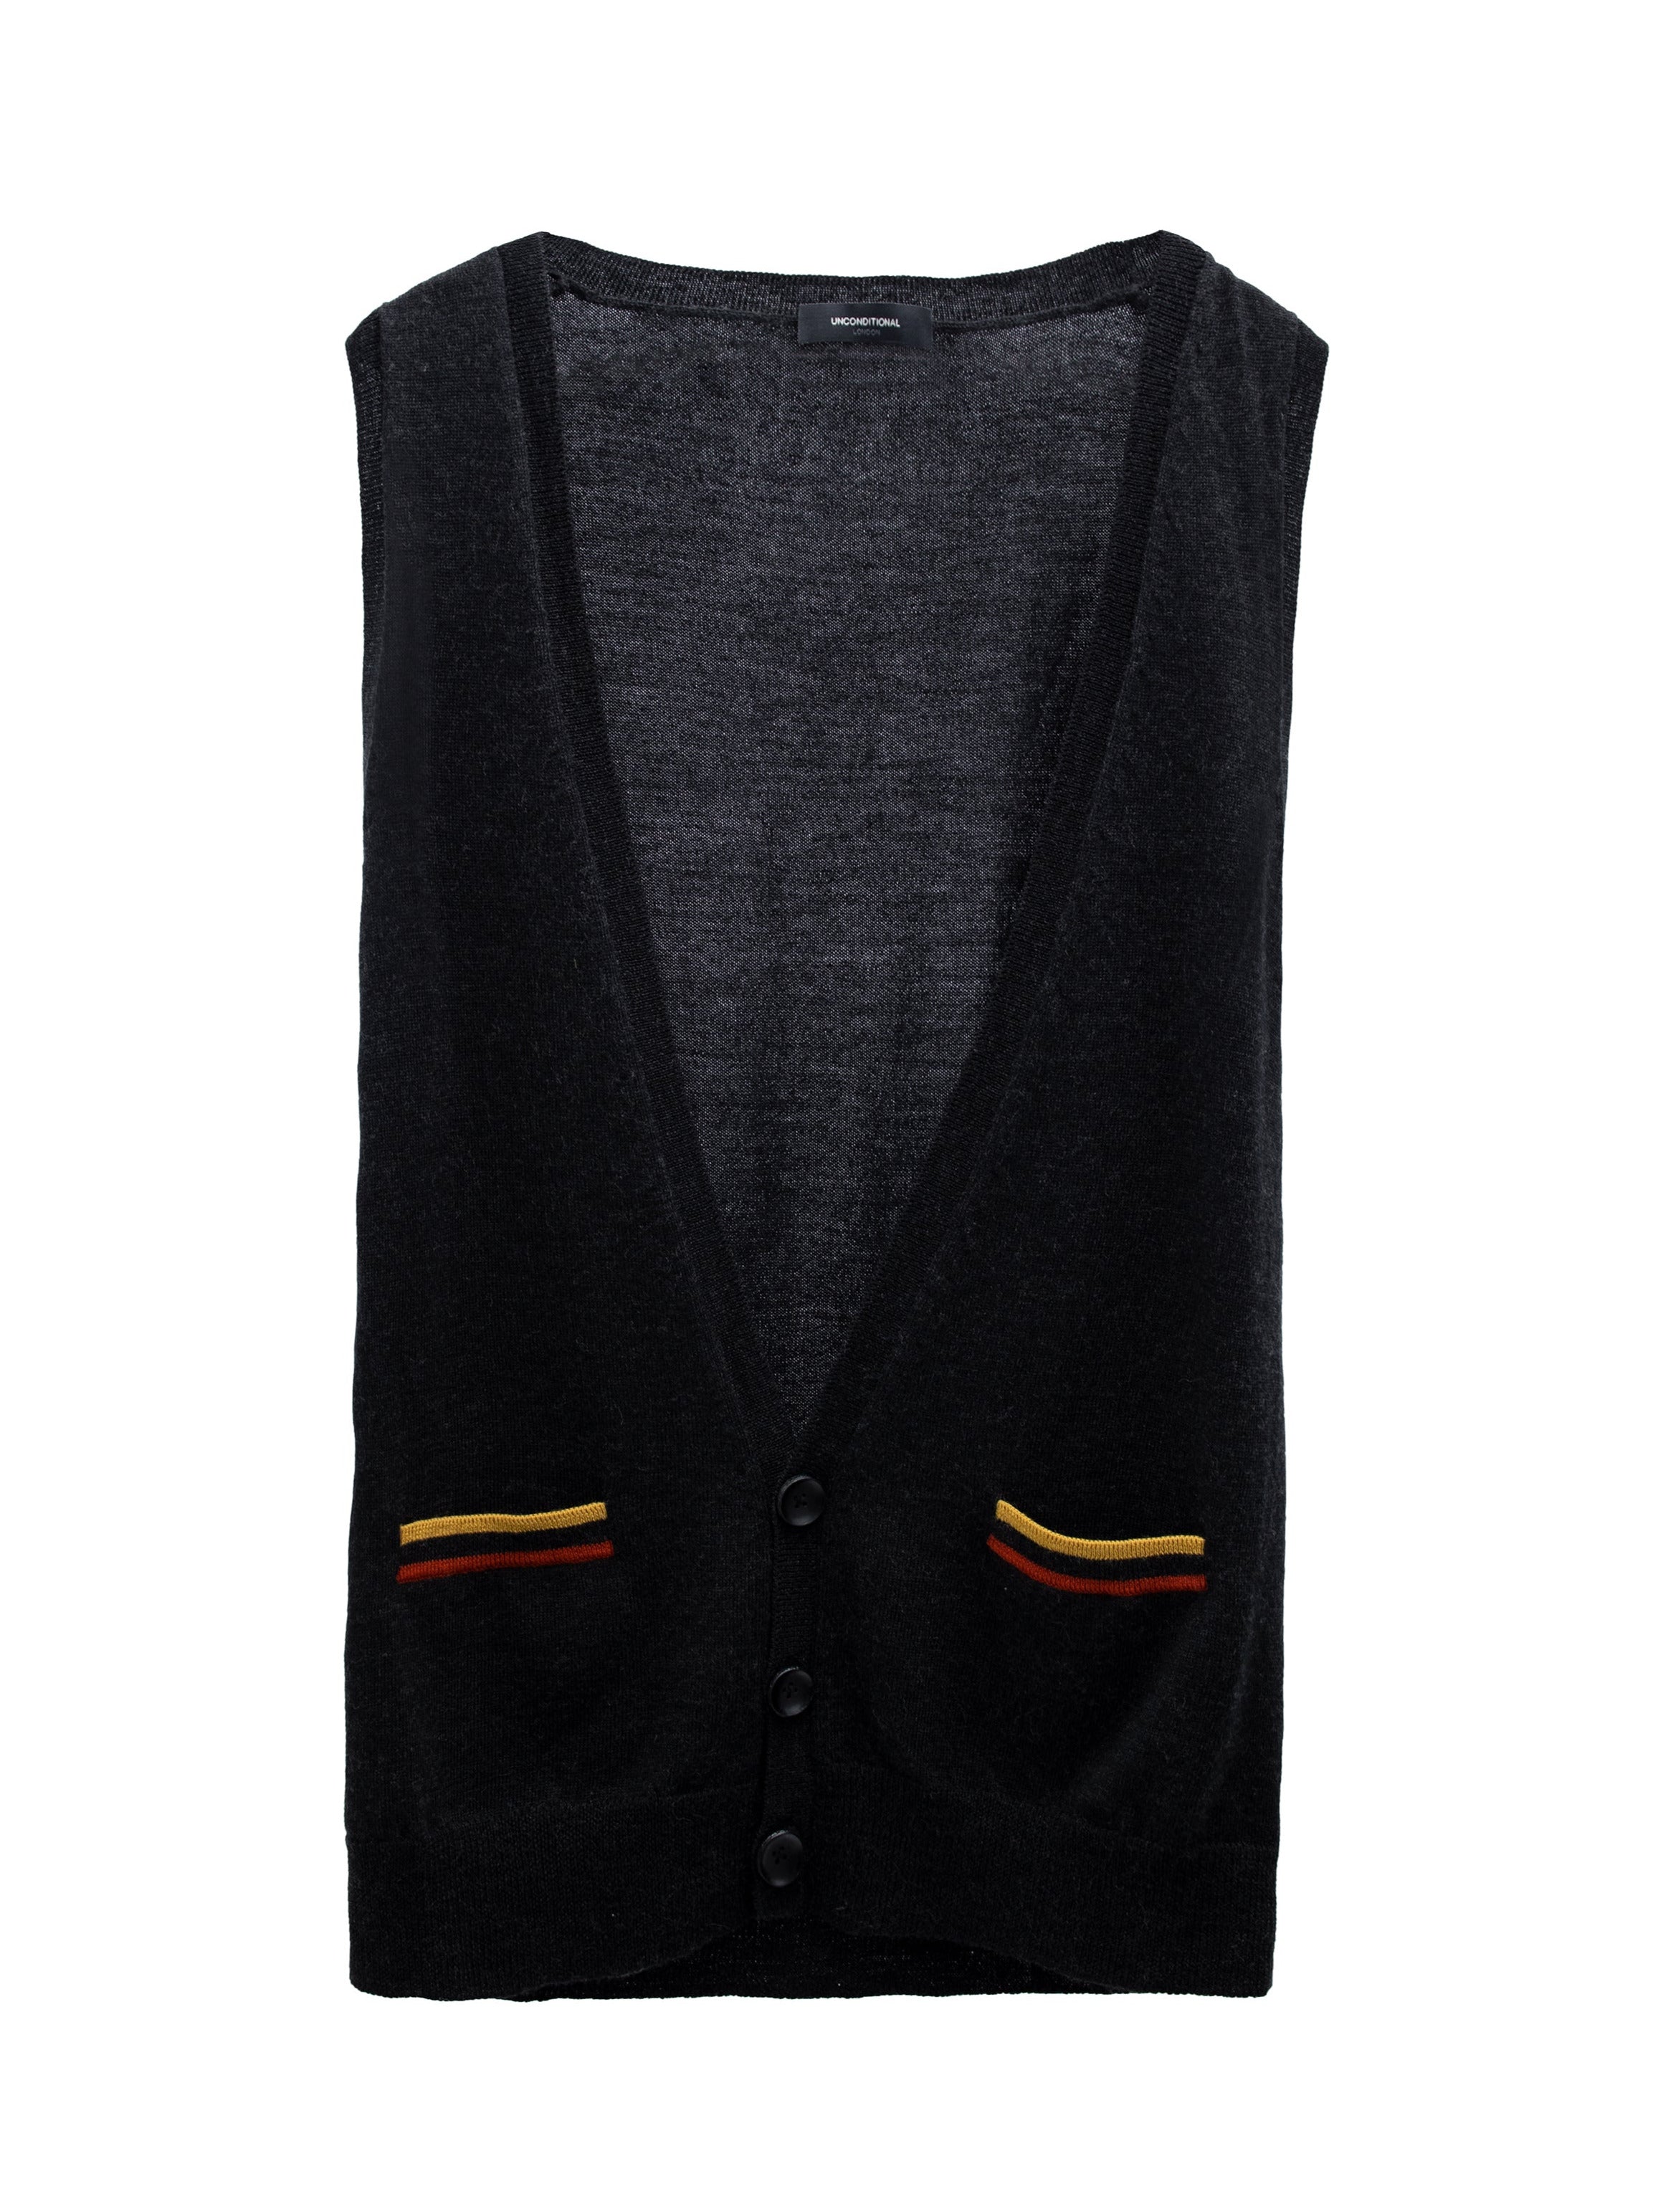 BLACK BUTTON UP KNITTED VEST